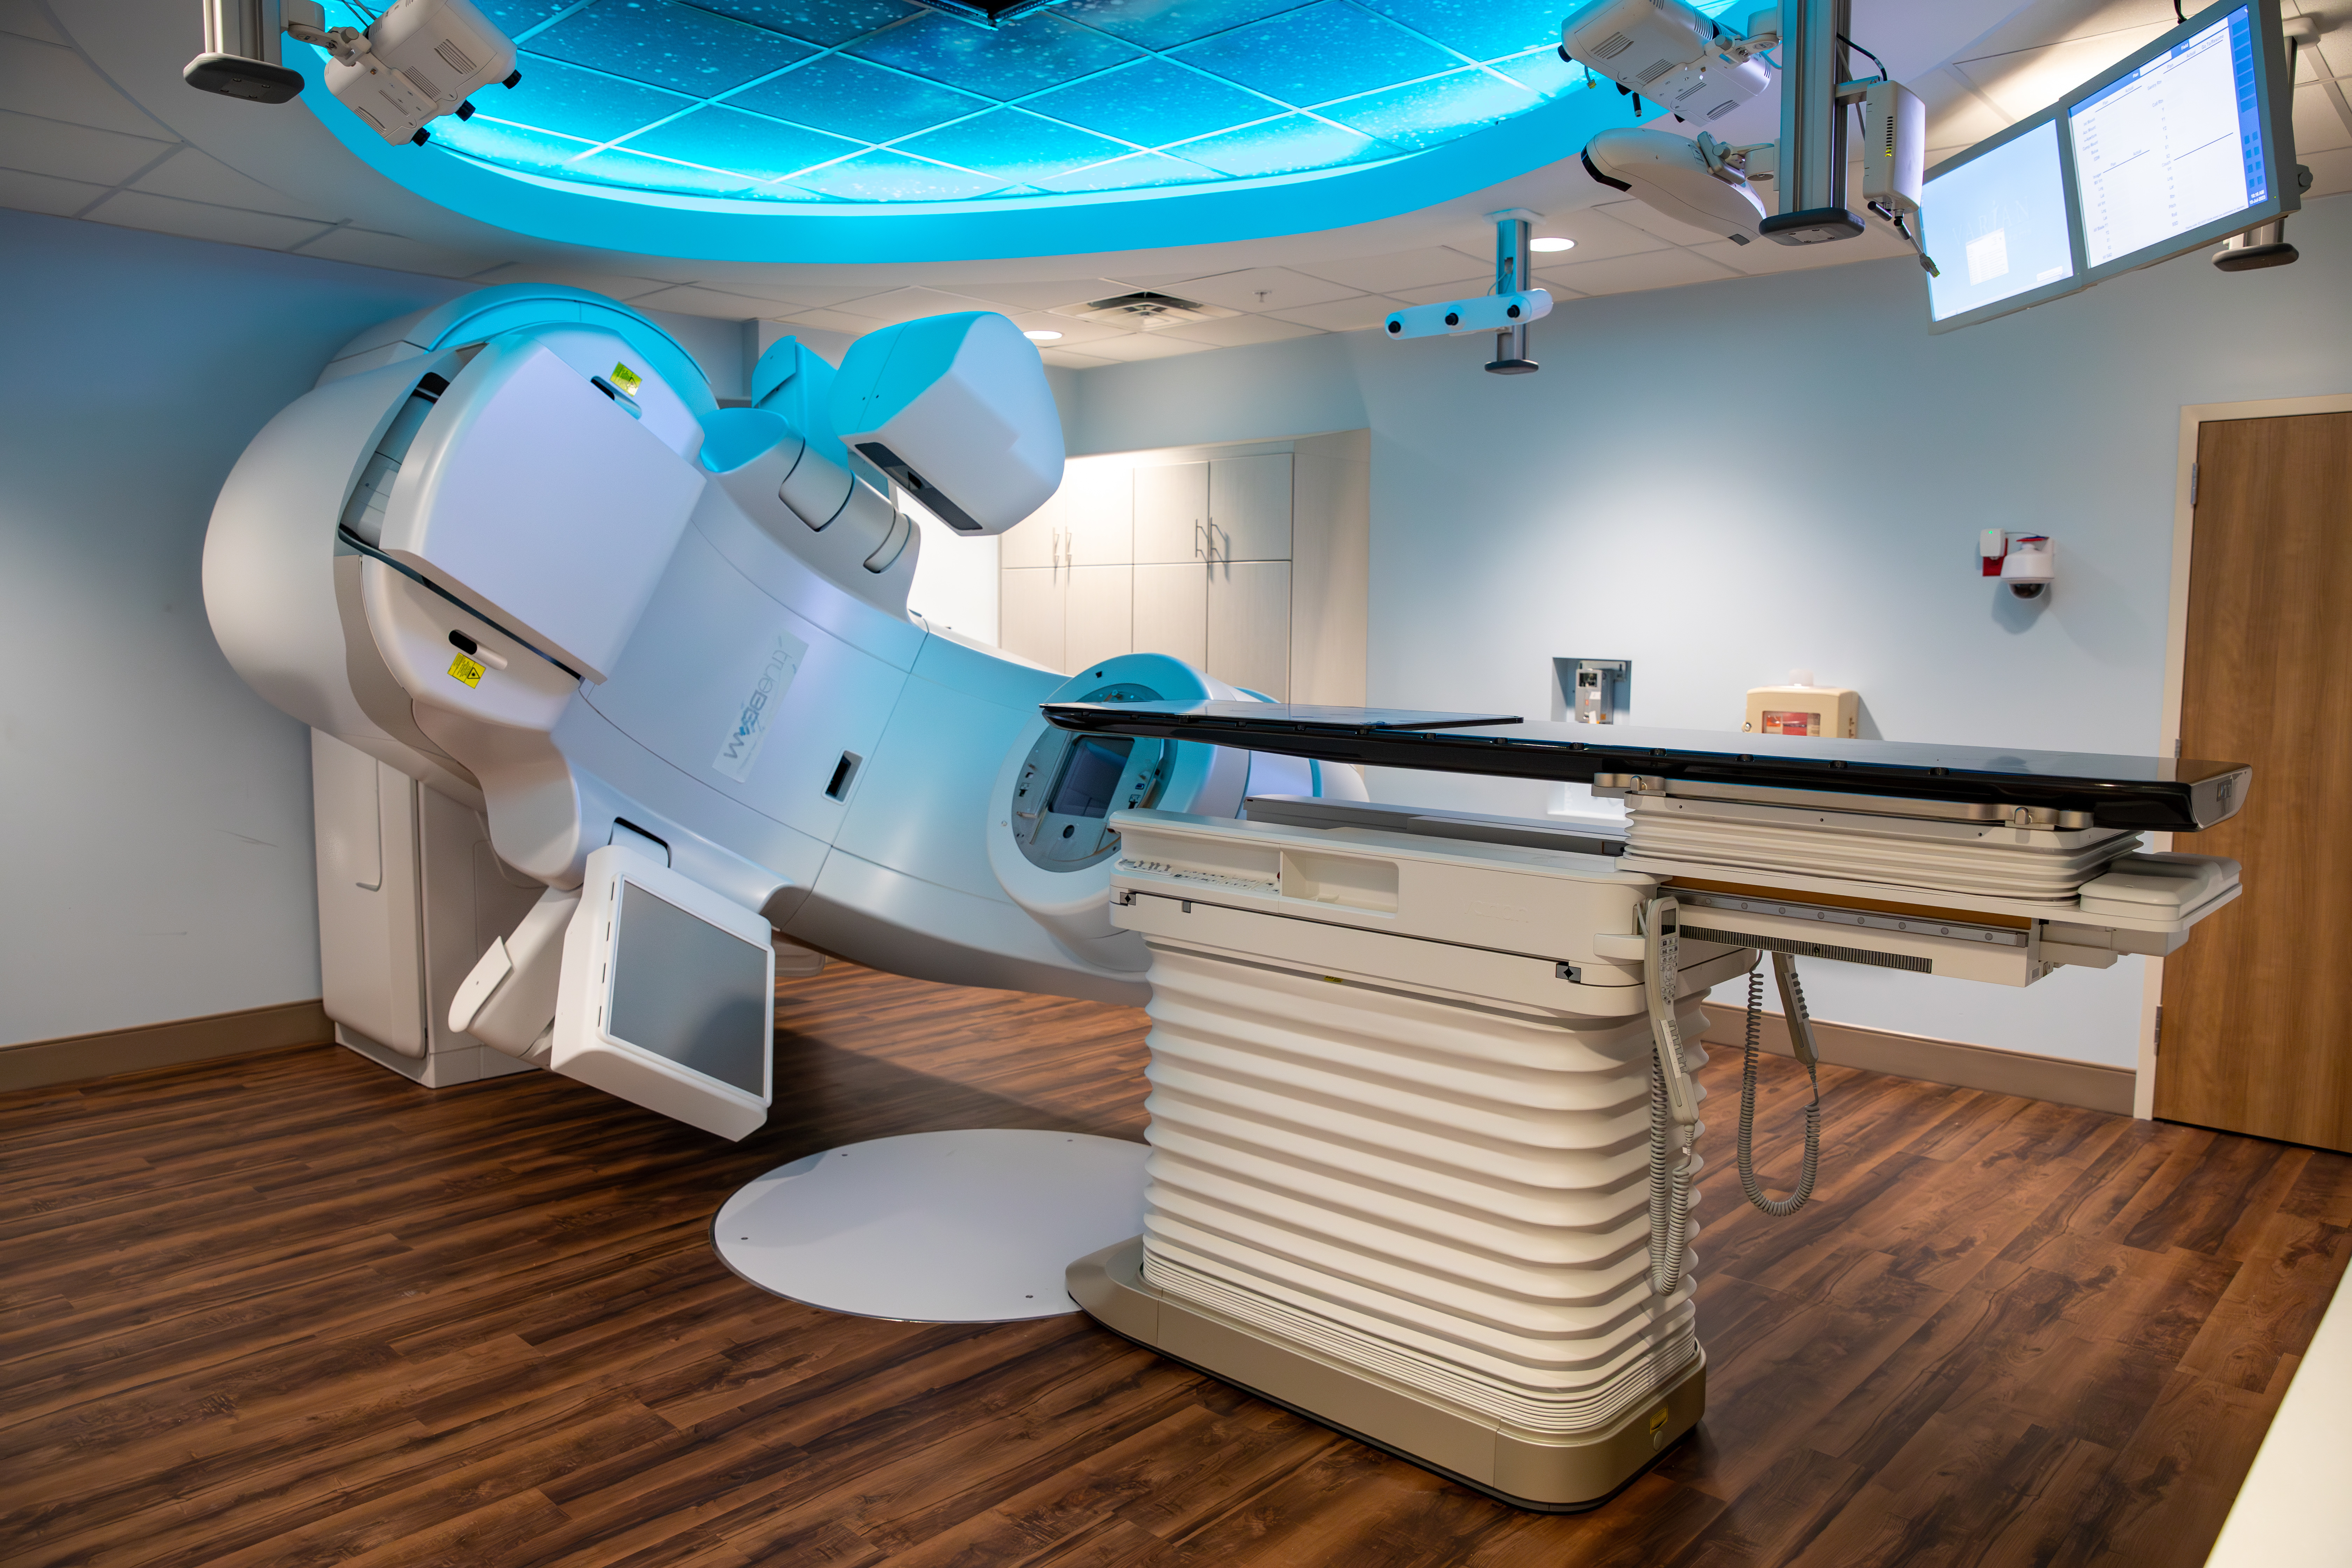 truebeam system in the tgh proton therapy room at the tgh cancer institute's brandon location